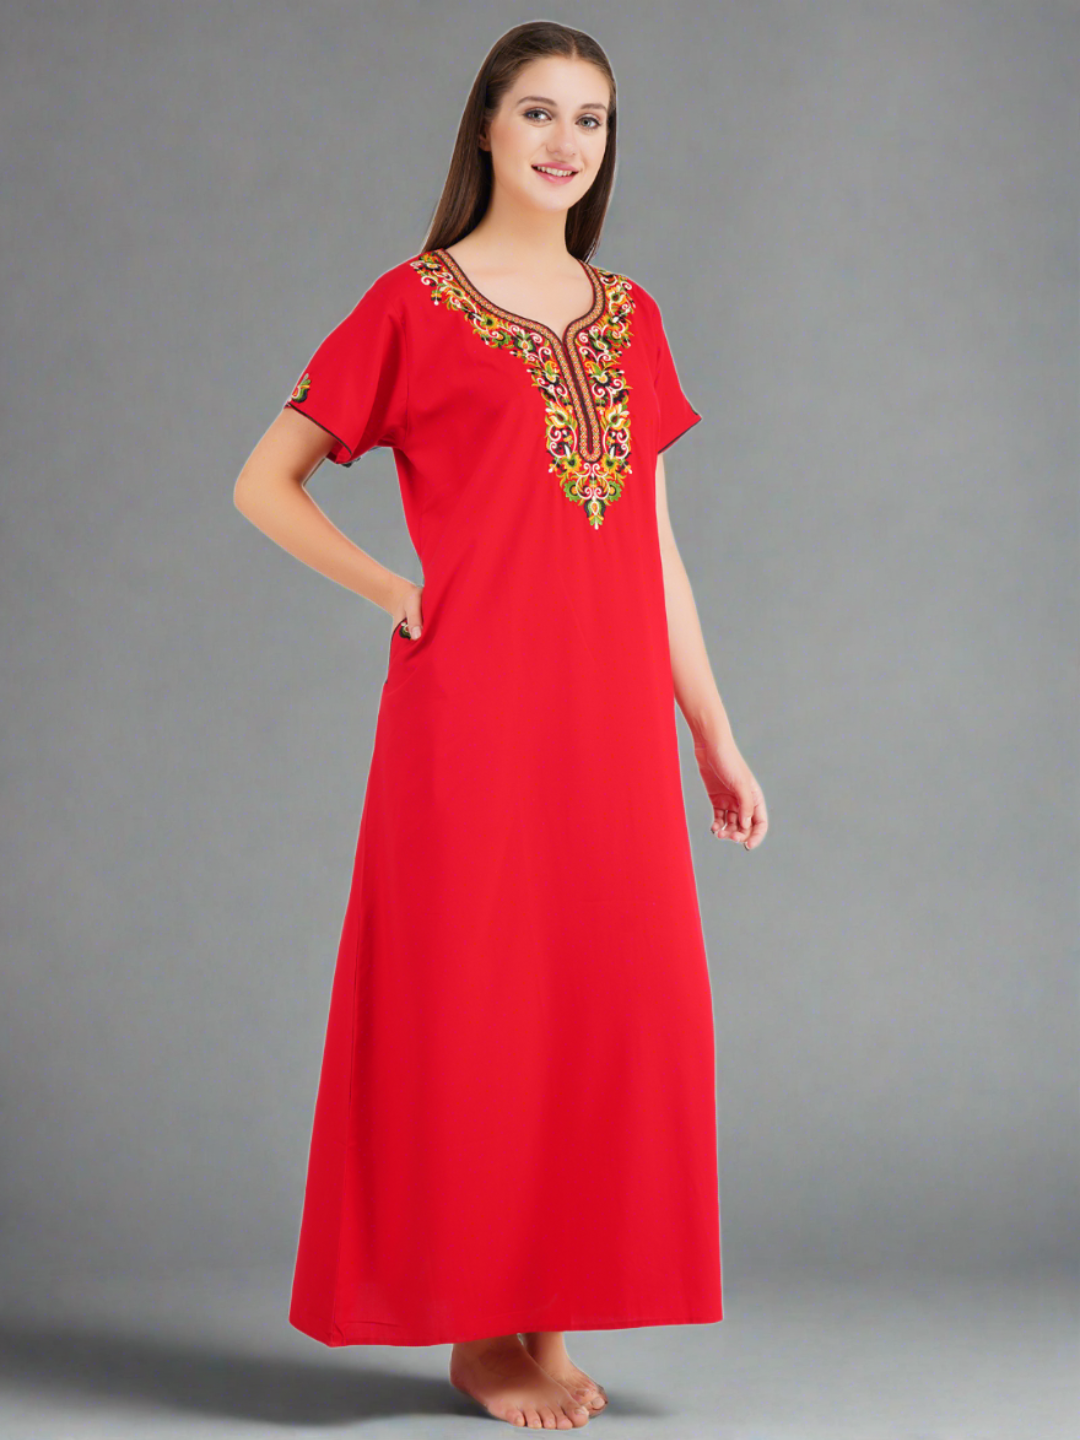 Paan shaped Embroidery Nightgown